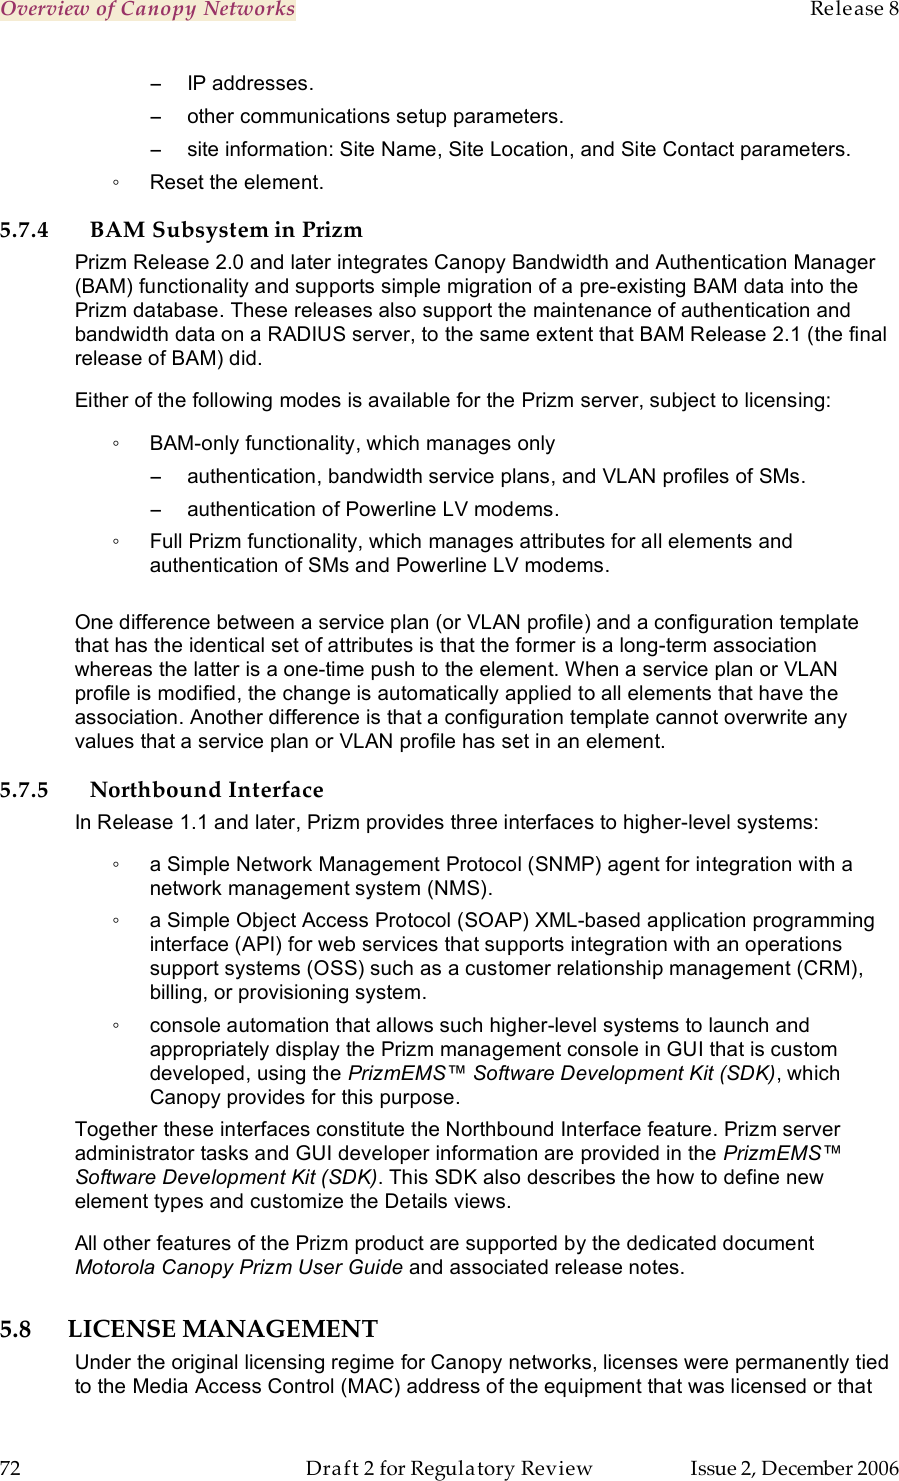 Overview of Canopy Networks    Release 8   72  Draft 2 for Regulatory Review  Issue 2, December 2006 −  IP addresses. −  other communications setup parameters. −  site information: Site Name, Site Location, and Site Contact parameters. ◦  Reset the element. 5.7.4 BAM Subsystem in Prizm Prizm Release 2.0 and later integrates Canopy Bandwidth and Authentication Manager (BAM) functionality and supports simple migration of a pre-existing BAM data into the Prizm database. These releases also support the maintenance of authentication and bandwidth data on a RADIUS server, to the same extent that BAM Release 2.1 (the final release of BAM) did. Either of the following modes is available for the Prizm server, subject to licensing: ◦  BAM-only functionality, which manages only  −  authentication, bandwidth service plans, and VLAN profiles of SMs. −  authentication of Powerline LV modems. ◦  Full Prizm functionality, which manages attributes for all elements and authentication of SMs and Powerline LV modems.  One difference between a service plan (or VLAN profile) and a configuration template that has the identical set of attributes is that the former is a long-term association whereas the latter is a one-time push to the element. When a service plan or VLAN profile is modified, the change is automatically applied to all elements that have the association. Another difference is that a configuration template cannot overwrite any values that a service plan or VLAN profile has set in an element. 5.7.5 Northbound Interface In Release 1.1 and later, Prizm provides three interfaces to higher-level systems: ◦  a Simple Network Management Protocol (SNMP) agent for integration with a network management system (NMS). ◦  a Simple Object Access Protocol (SOAP) XML-based application programming interface (API) for web services that supports integration with an operations support systems (OSS) such as a customer relationship management (CRM), billing, or provisioning system. ◦  console automation that allows such higher-level systems to launch and appropriately display the Prizm management console in GUI that is custom developed, using the PrizmEMS™ Software Development Kit (SDK), which Canopy provides for this purpose. Together these interfaces constitute the Northbound Interface feature. Prizm server administrator tasks and GUI developer information are provided in the PrizmEMS™ Software Development Kit (SDK). This SDK also describes the how to define new element types and customize the Details views. All other features of the Prizm product are supported by the dedicated document Motorola Canopy Prizm User Guide and associated release notes. 5.8 LICENSE MANAGEMENT Under the original licensing regime for Canopy networks, licenses were permanently tied to the Media Access Control (MAC) address of the equipment that was licensed or that 